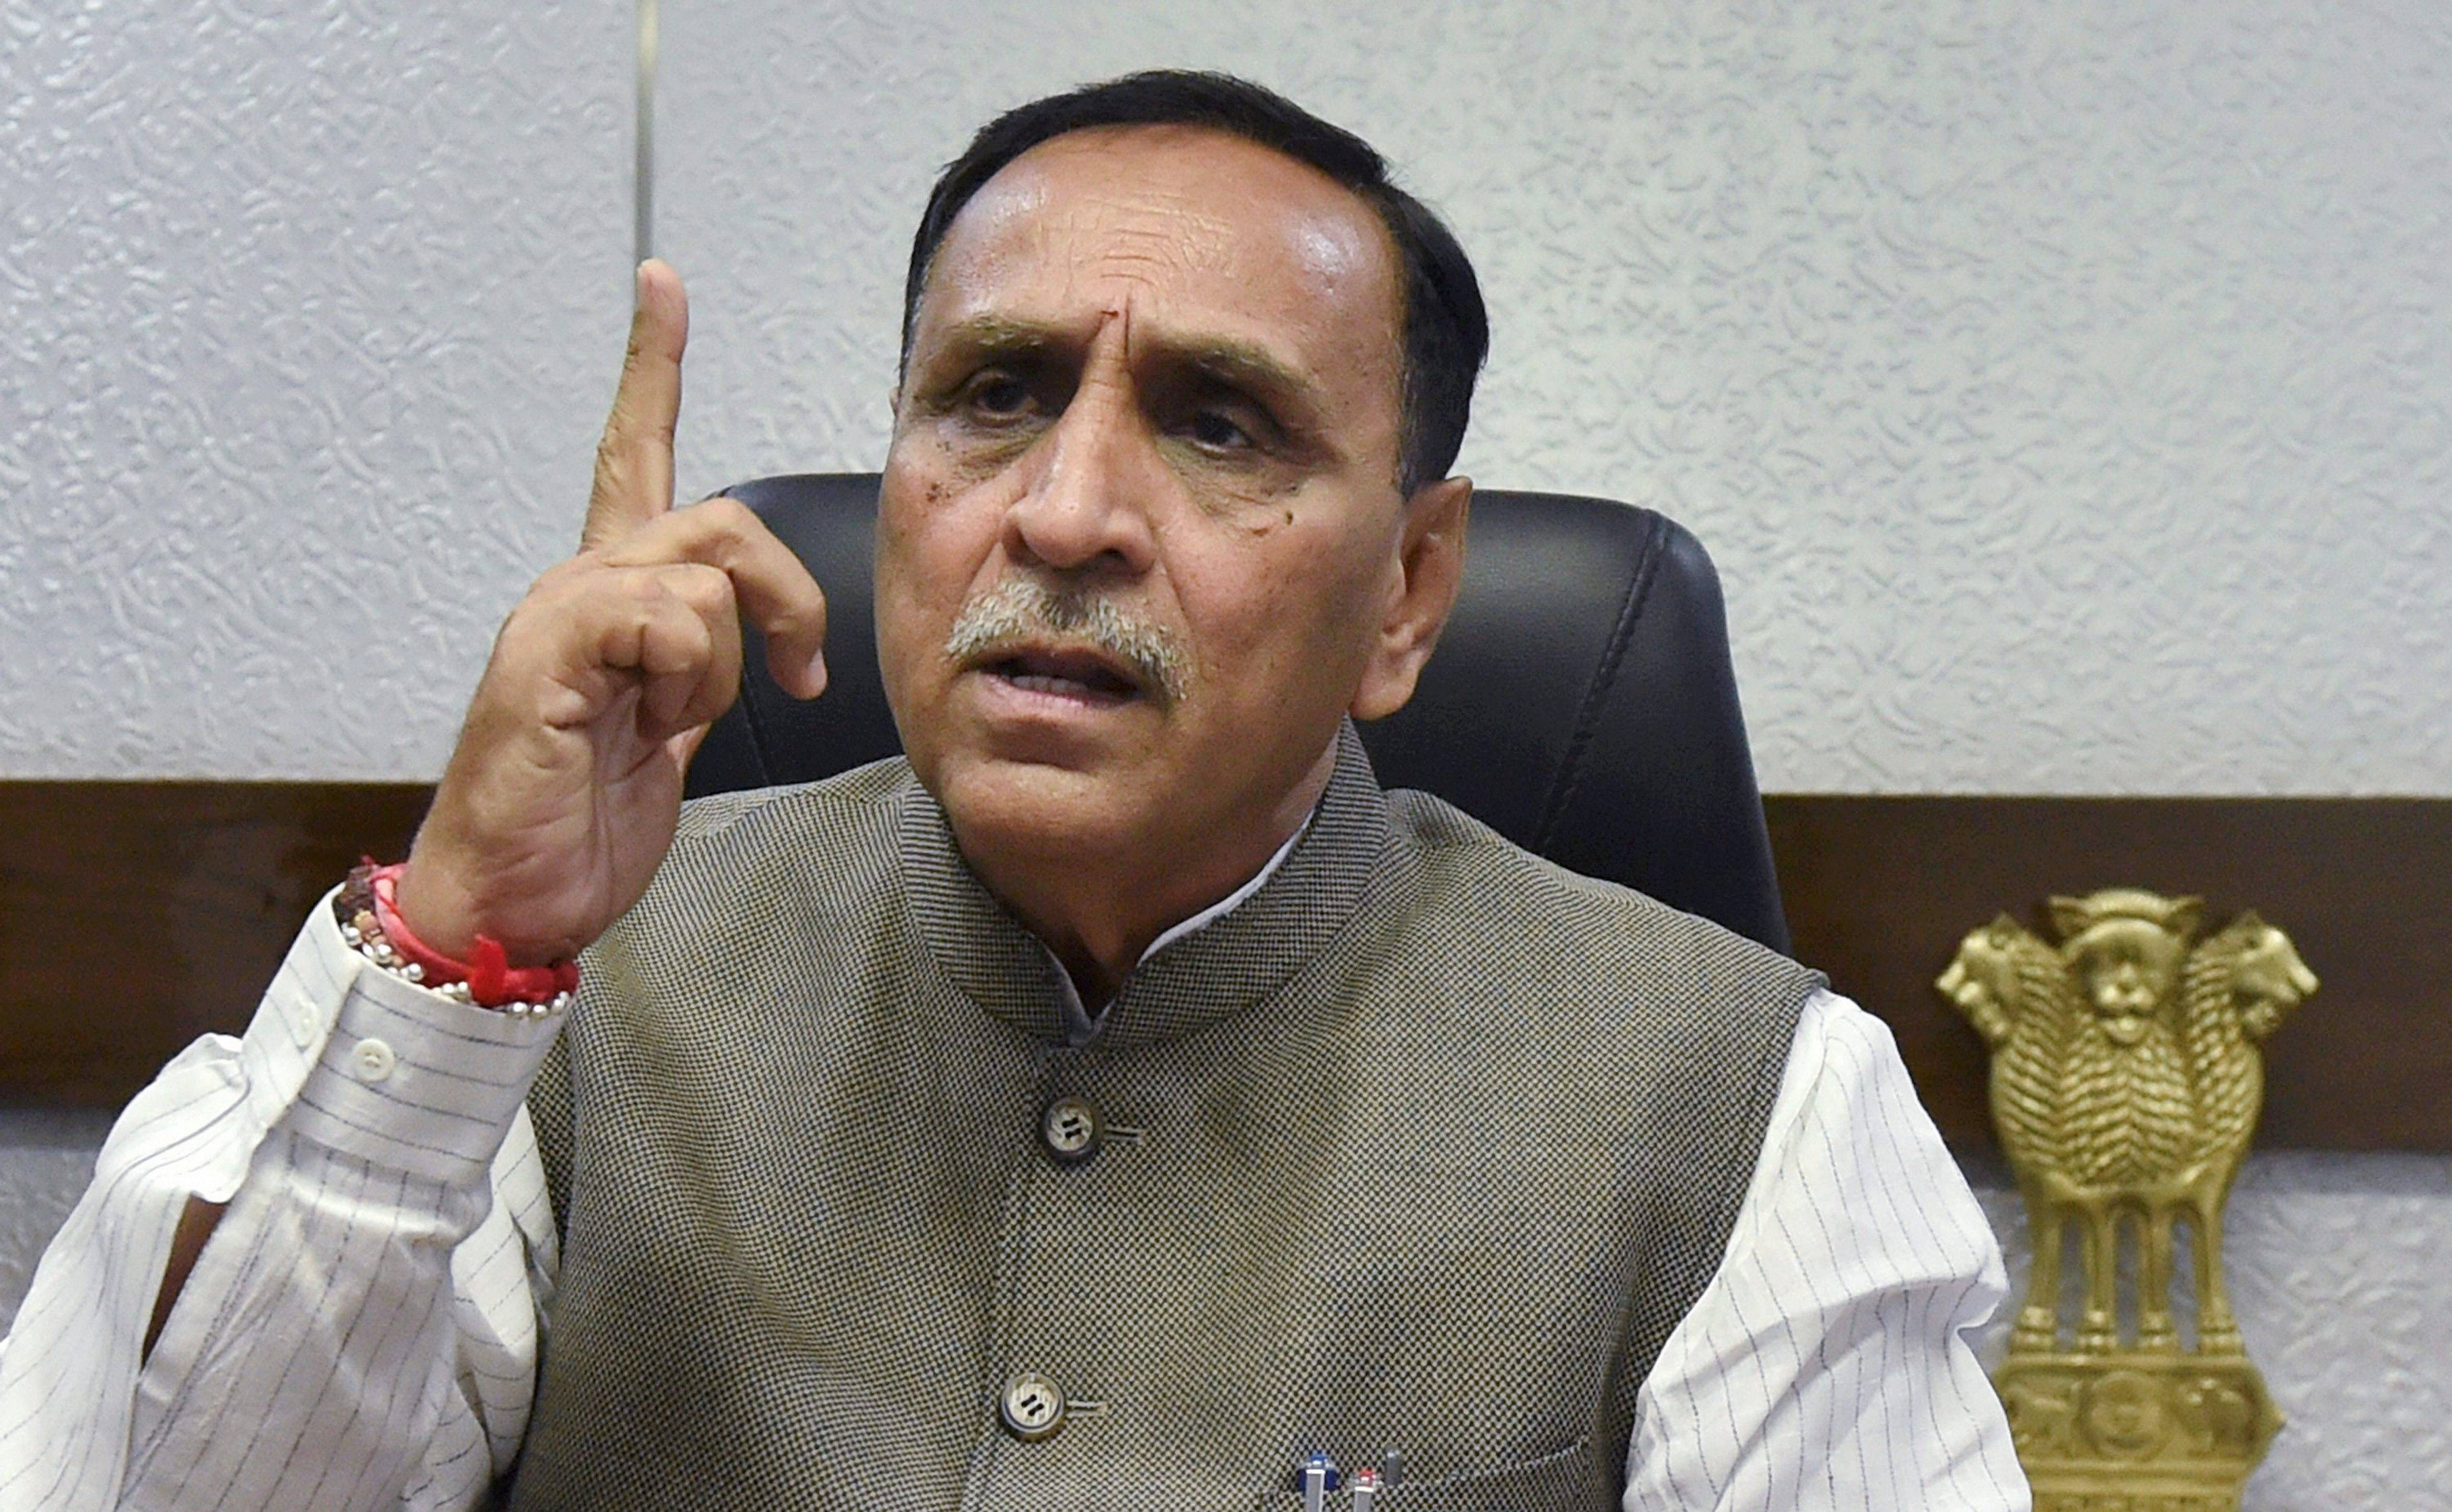 During this one week, celebrities and prominent citizens will address people and share their views about ways to fight the pandemic, said Rupani. (Credit: PTI Photo)